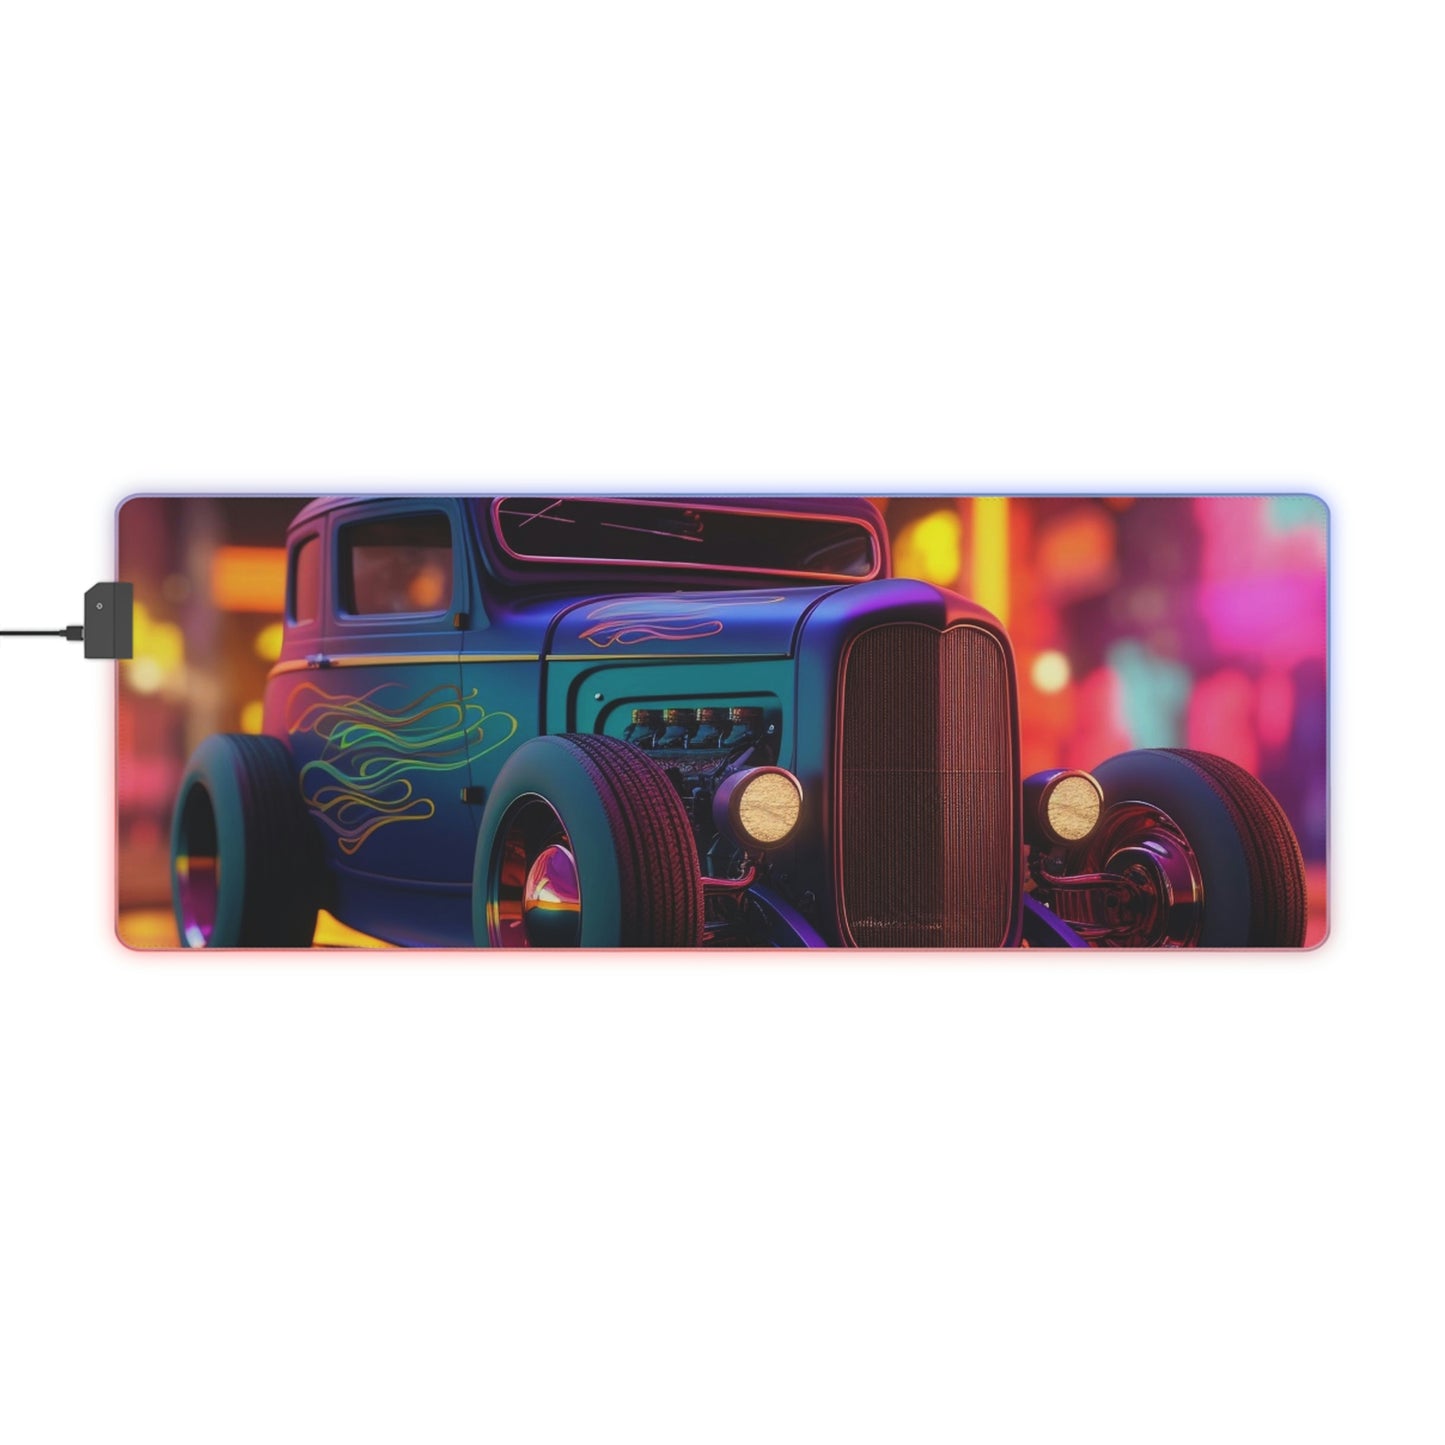 LED Gaming Mouse Pad Hyper Colorful Hotrod 2